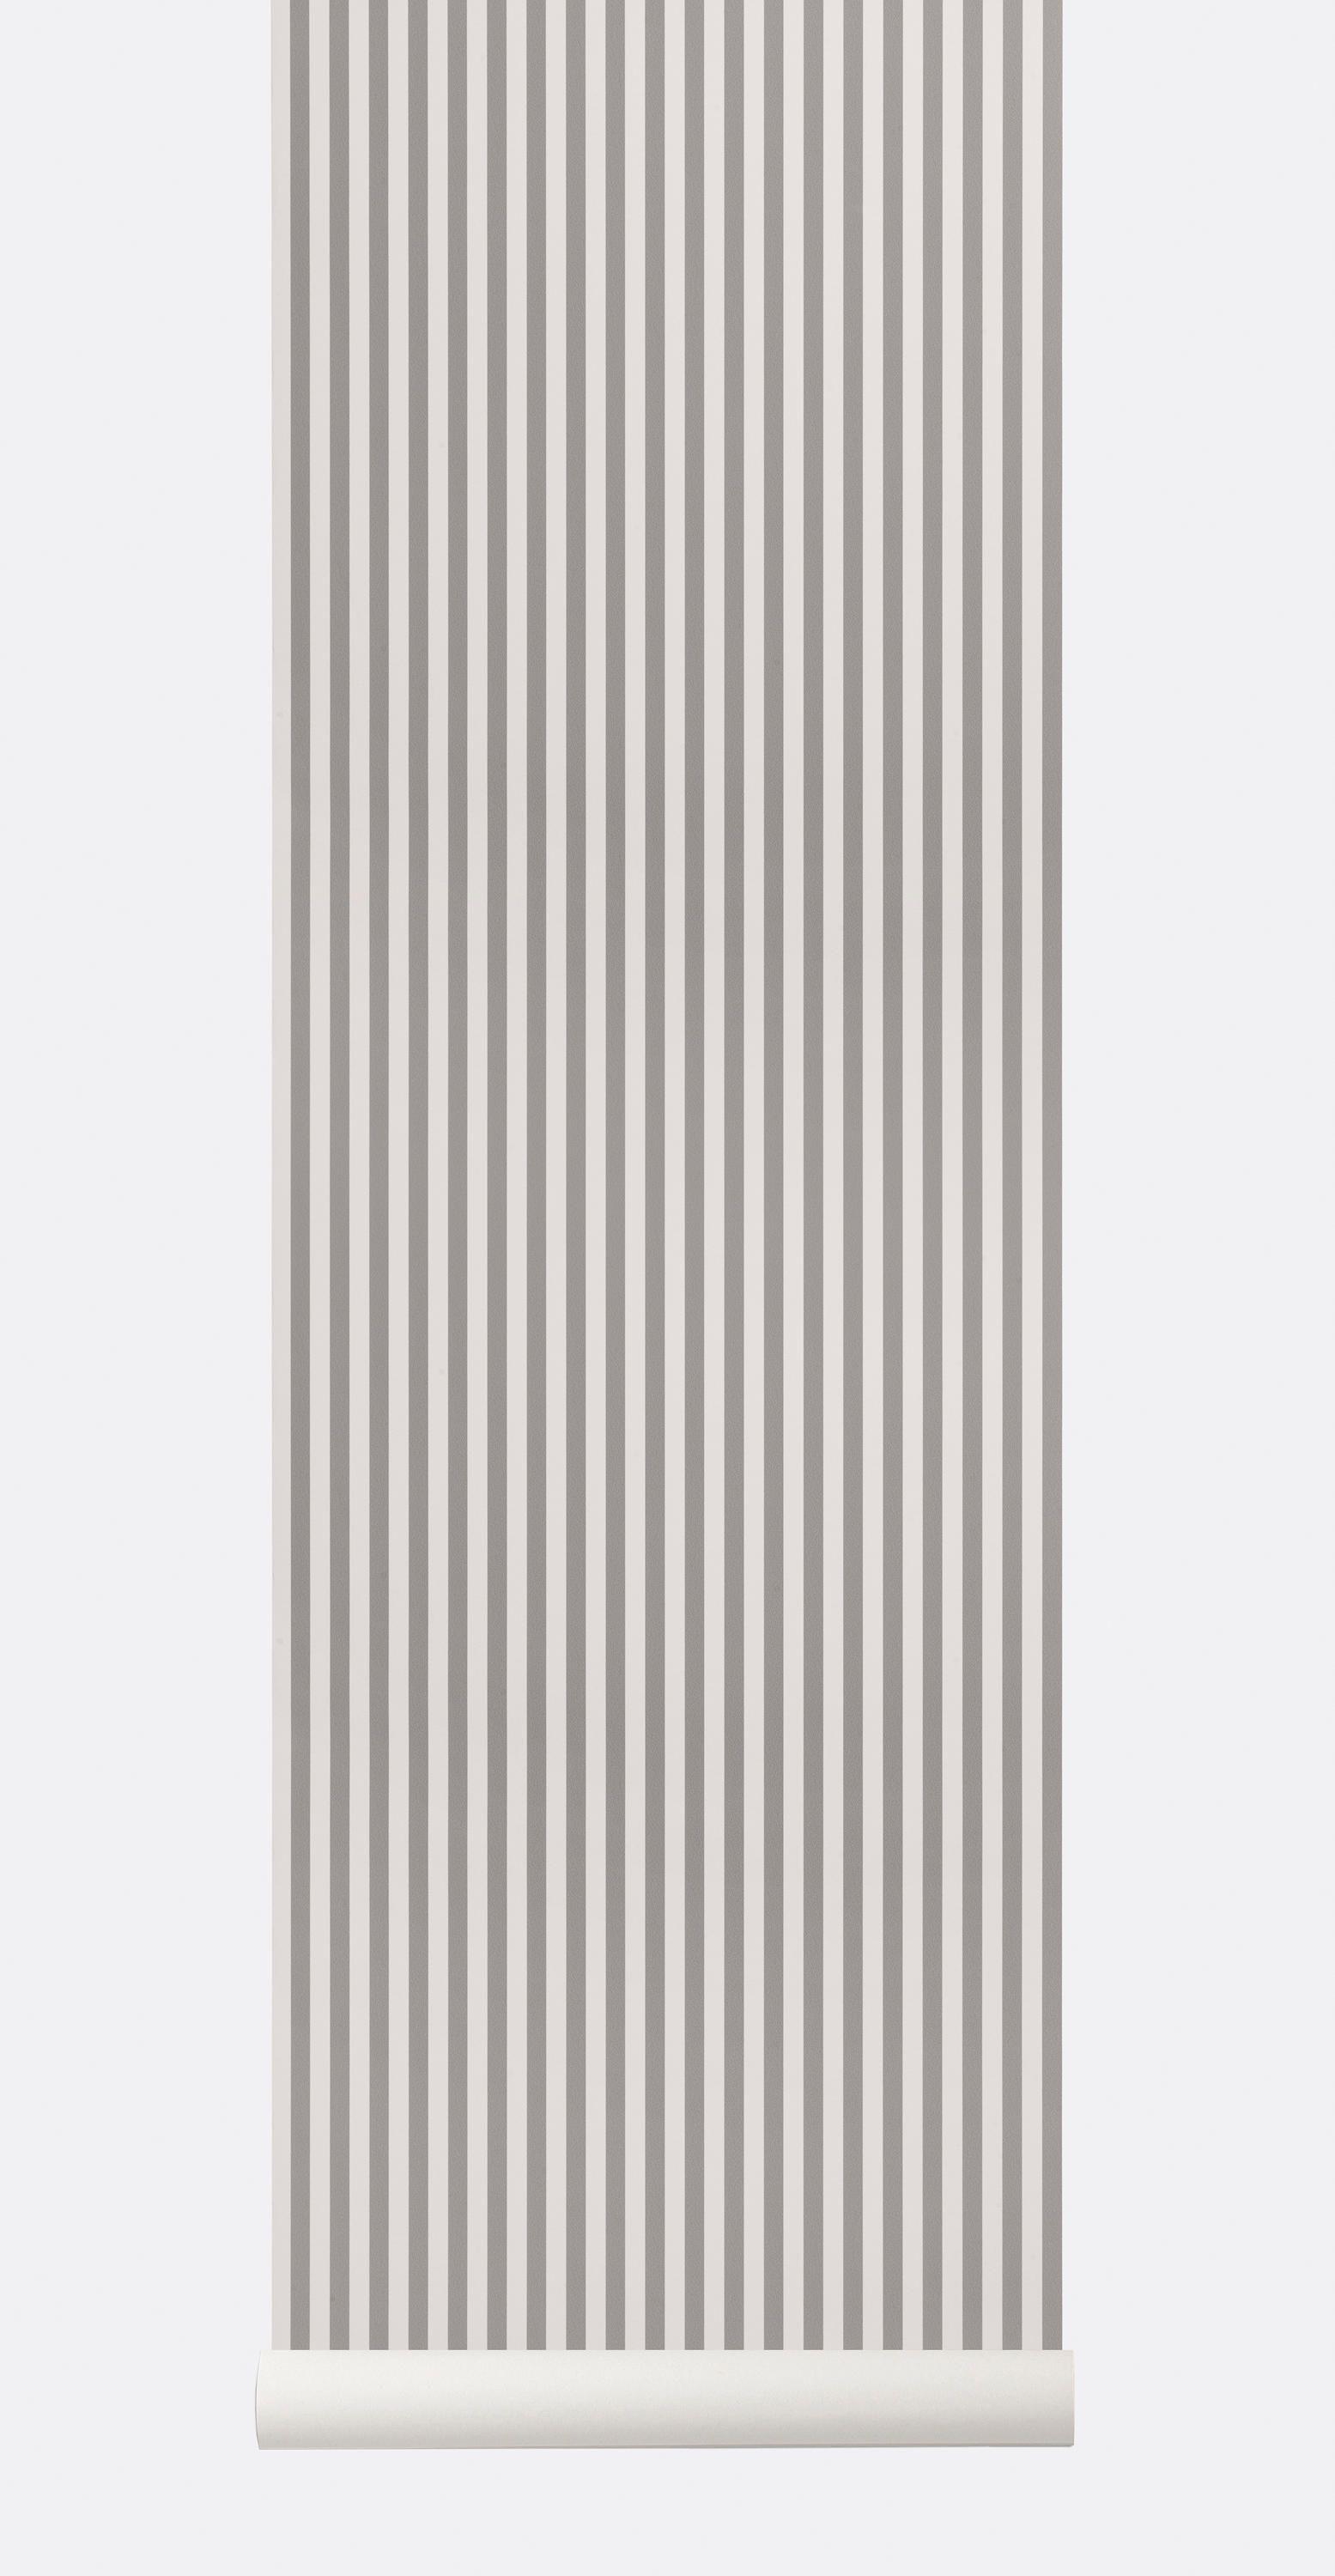 Off White Lines Logo - WALLPAPER THIN LINES - GREY/OFF WHITE - Wall coverings / wallpapers ...